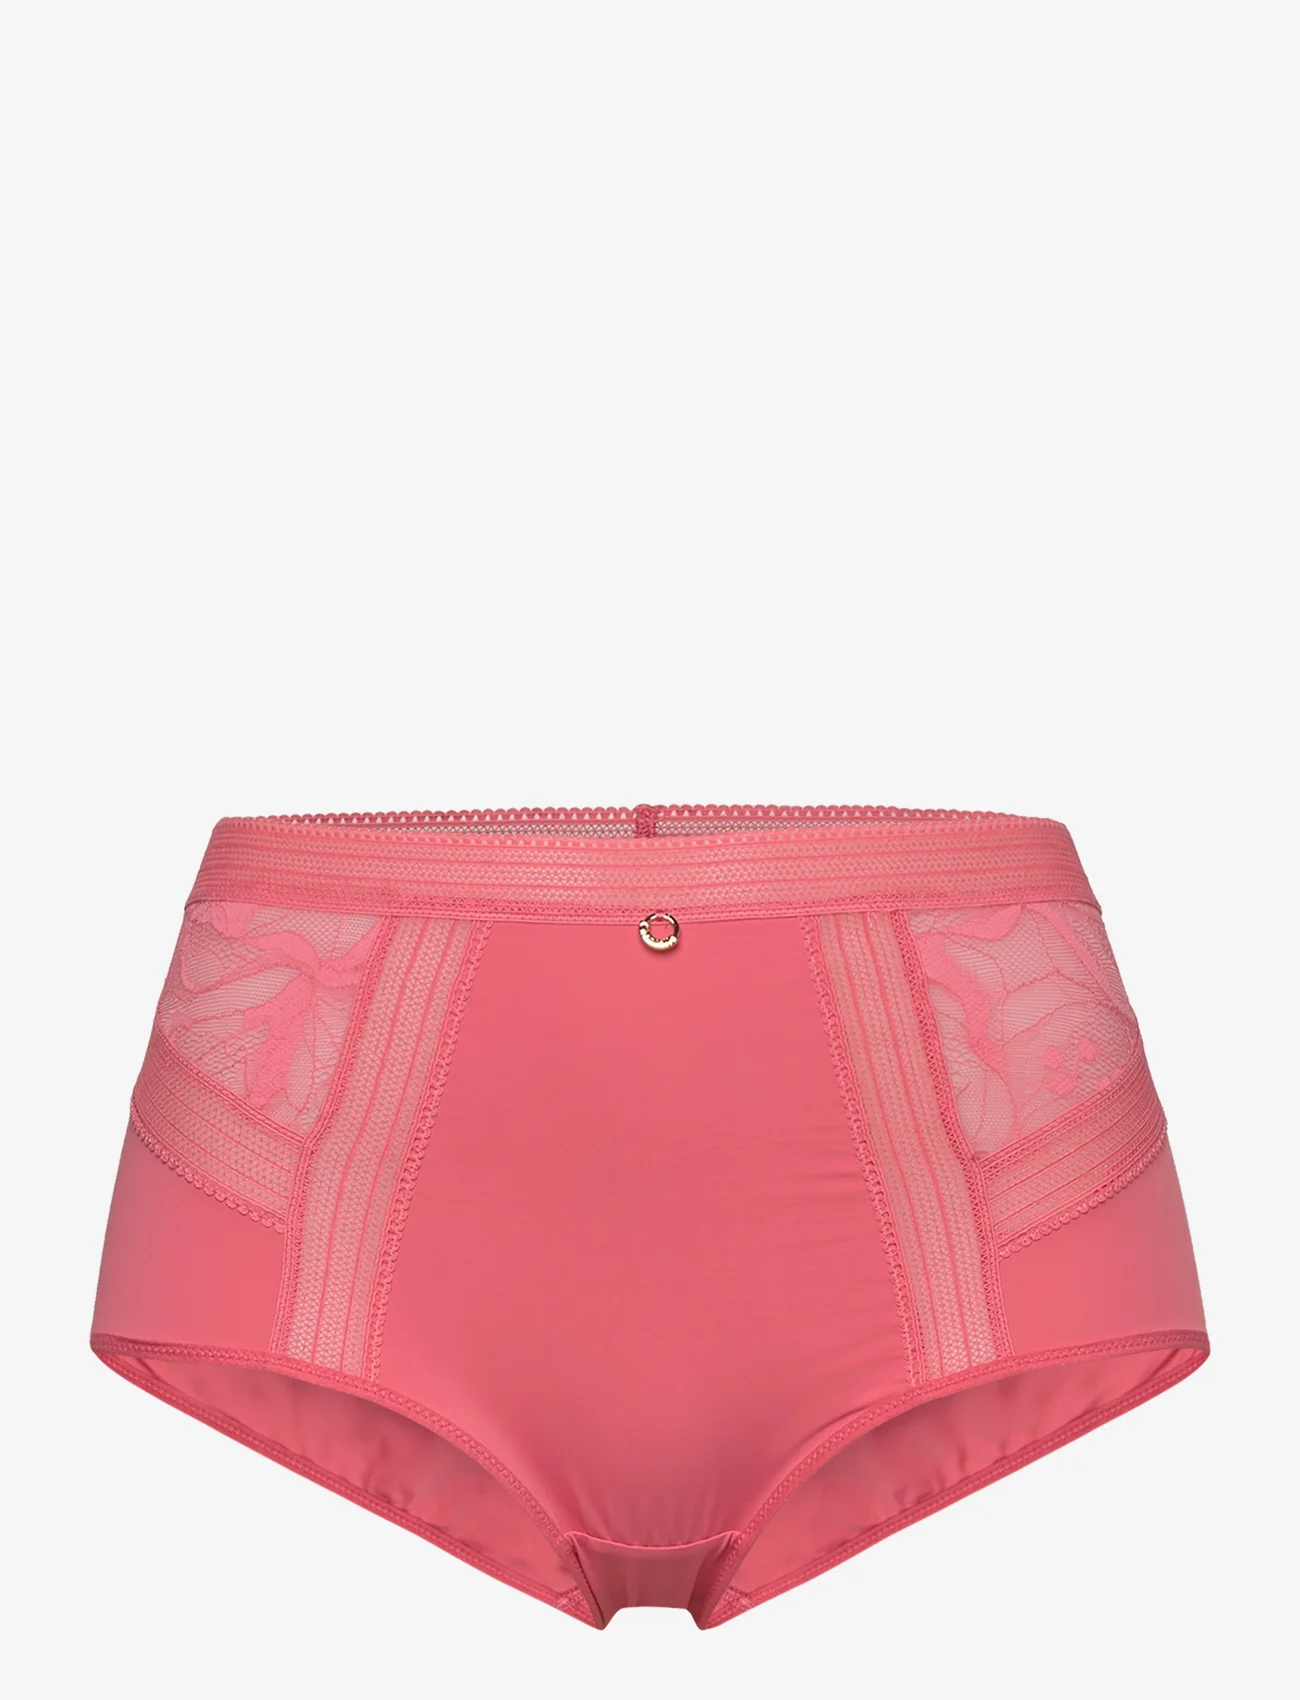 Chantelle Beach - True lace High-waisted full brief - slipjes - pink rose - 0